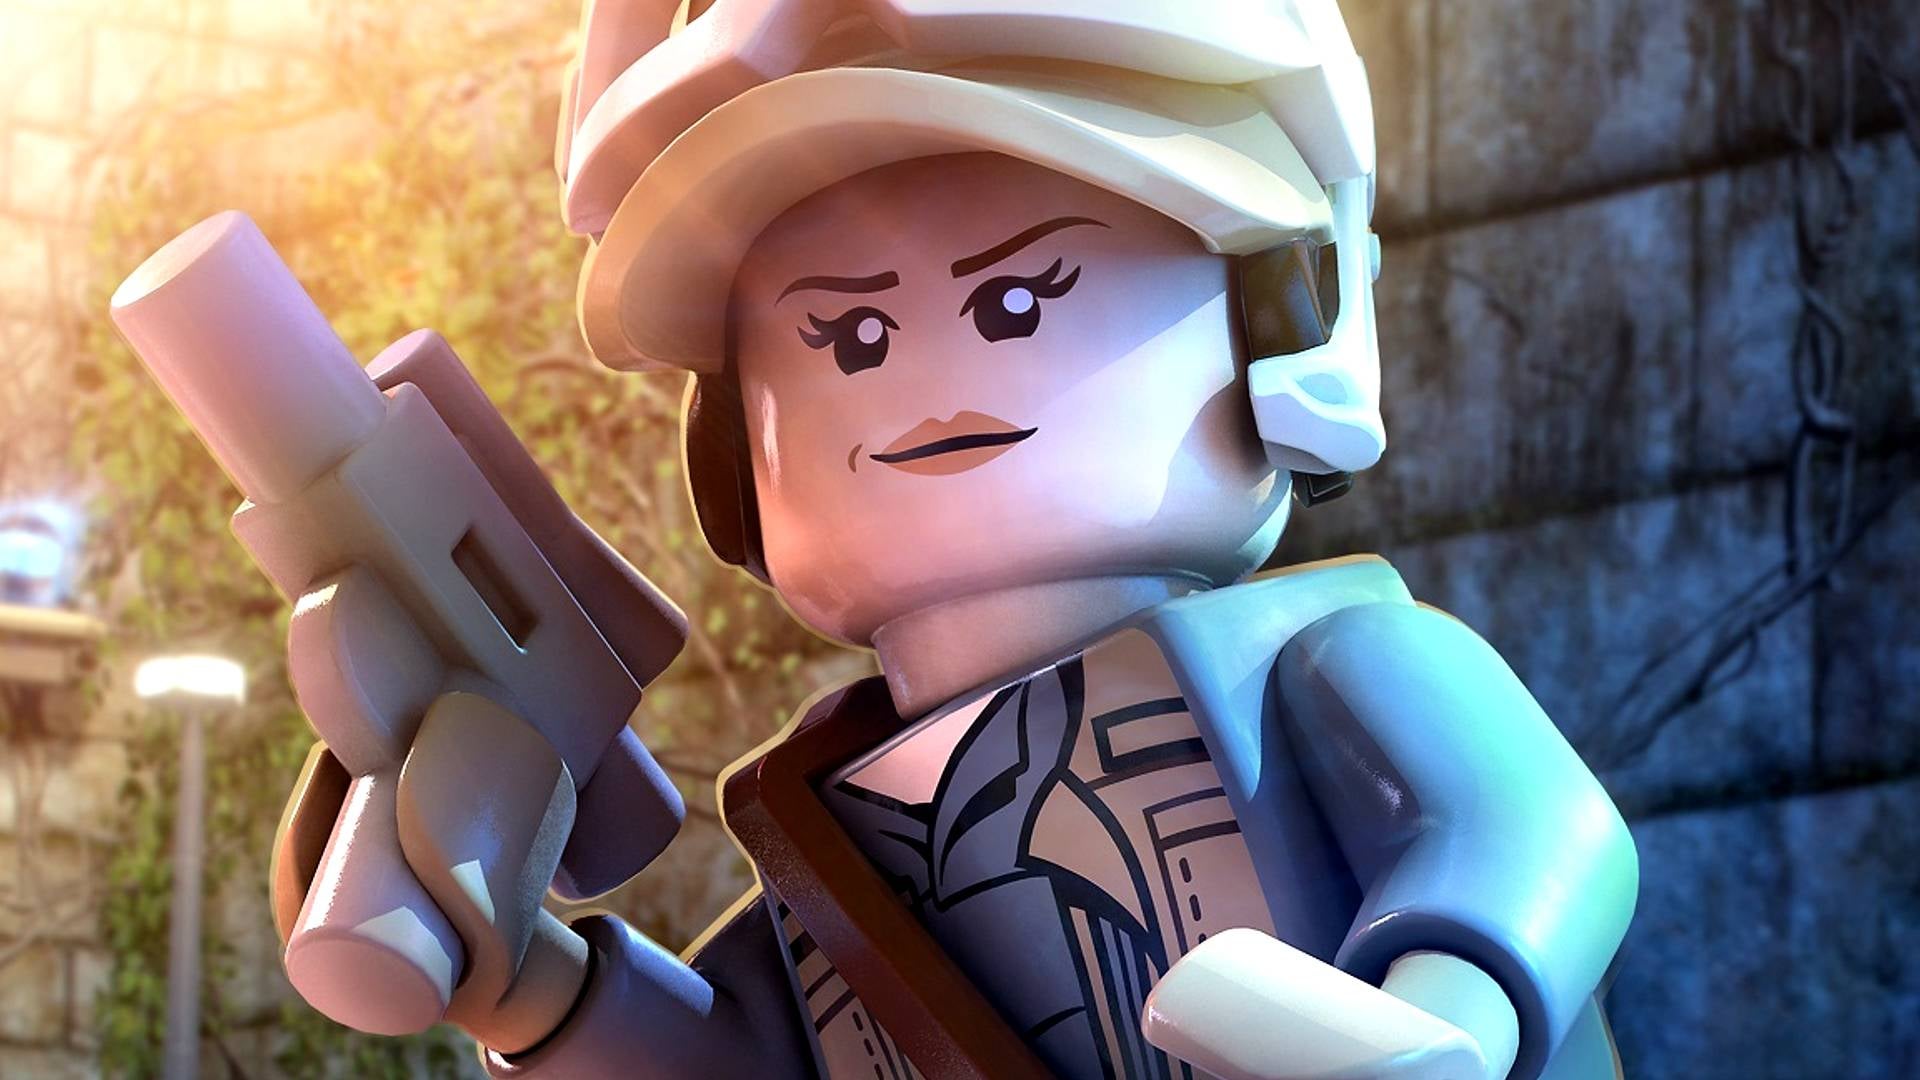 Lego Star Wars: The Skywalker Saga has led to extensive crunch at